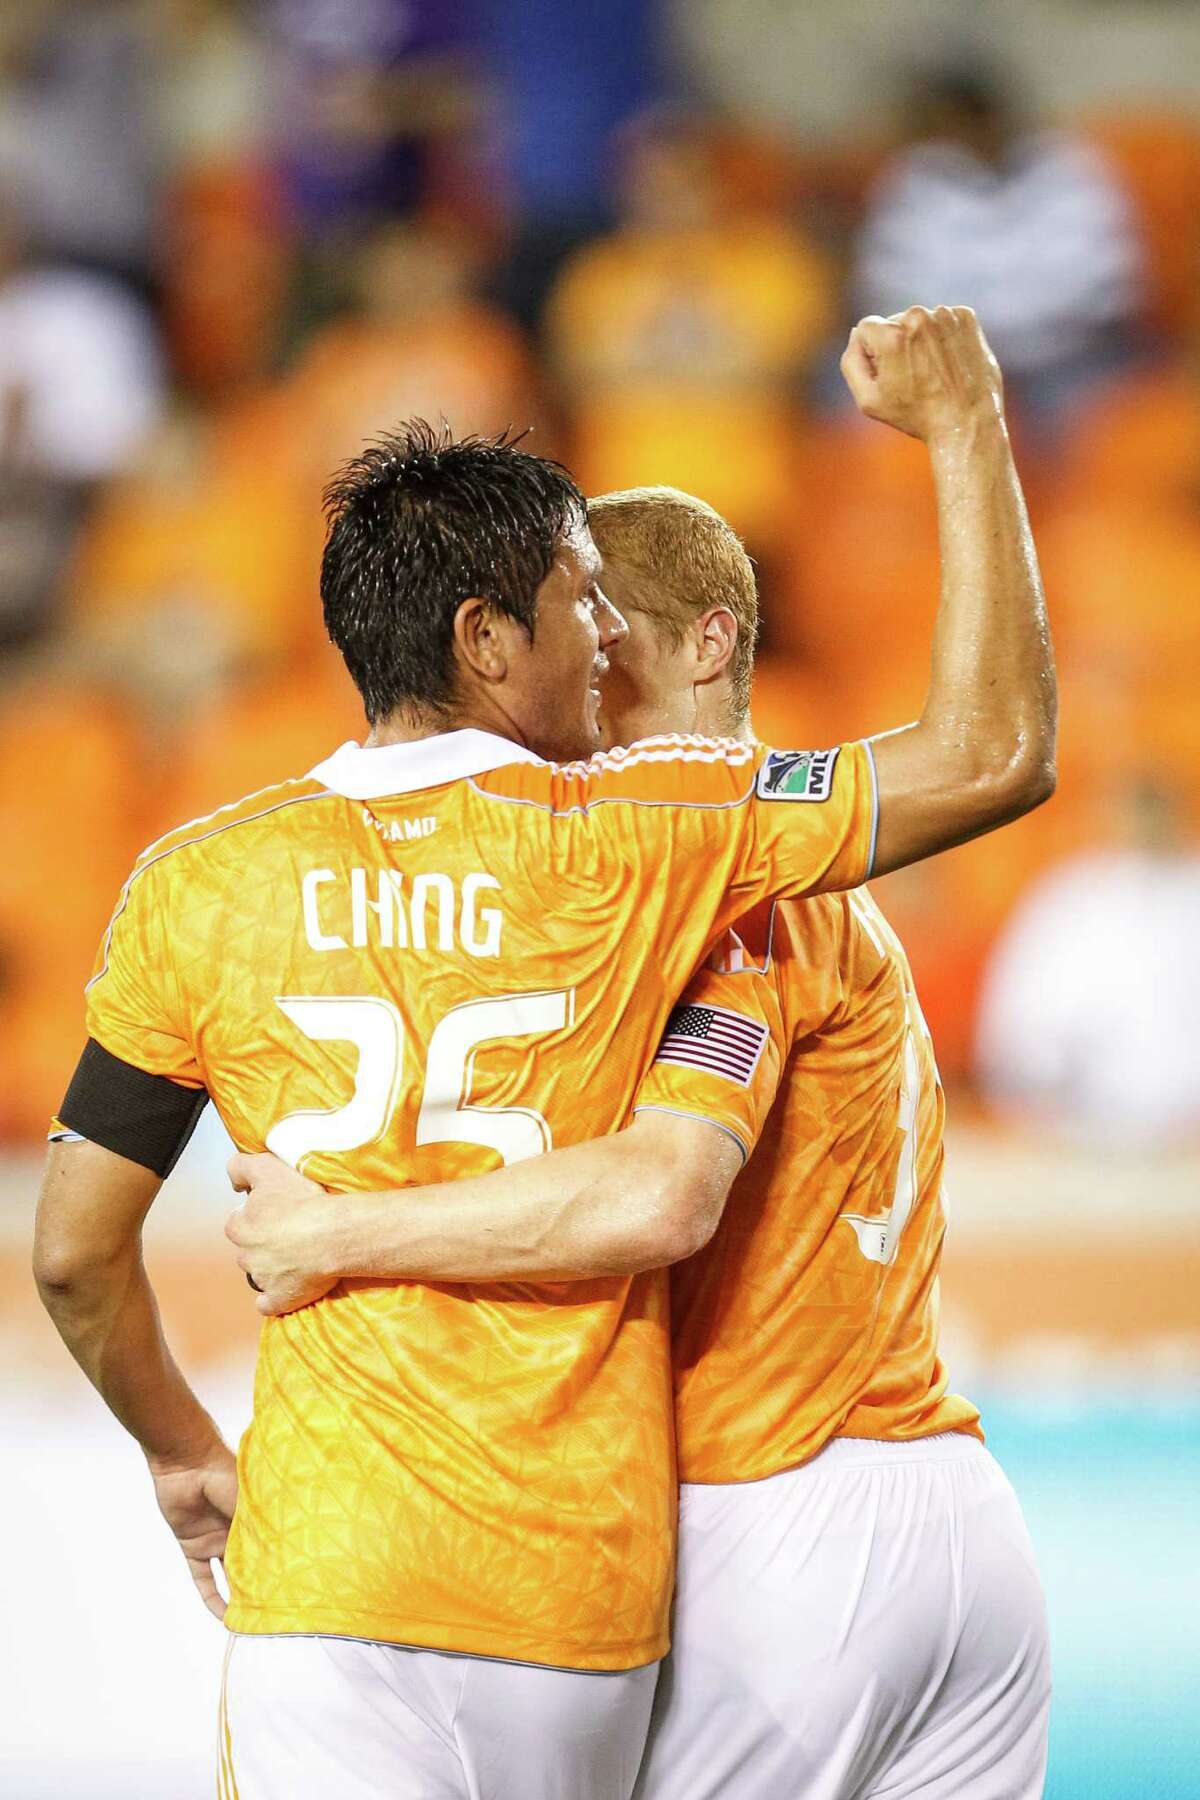 Houston Dynamo forward Brian Ching (25) gets a hug from Andre Hainault (31) after Ching scored a penalty kick to put the Dynamo up 4-0 during the Houston Dynamo vs. D.C. United MLS soccer game at BBVA Compass Stadium, Sunday, July 15, 2012, in Houston.